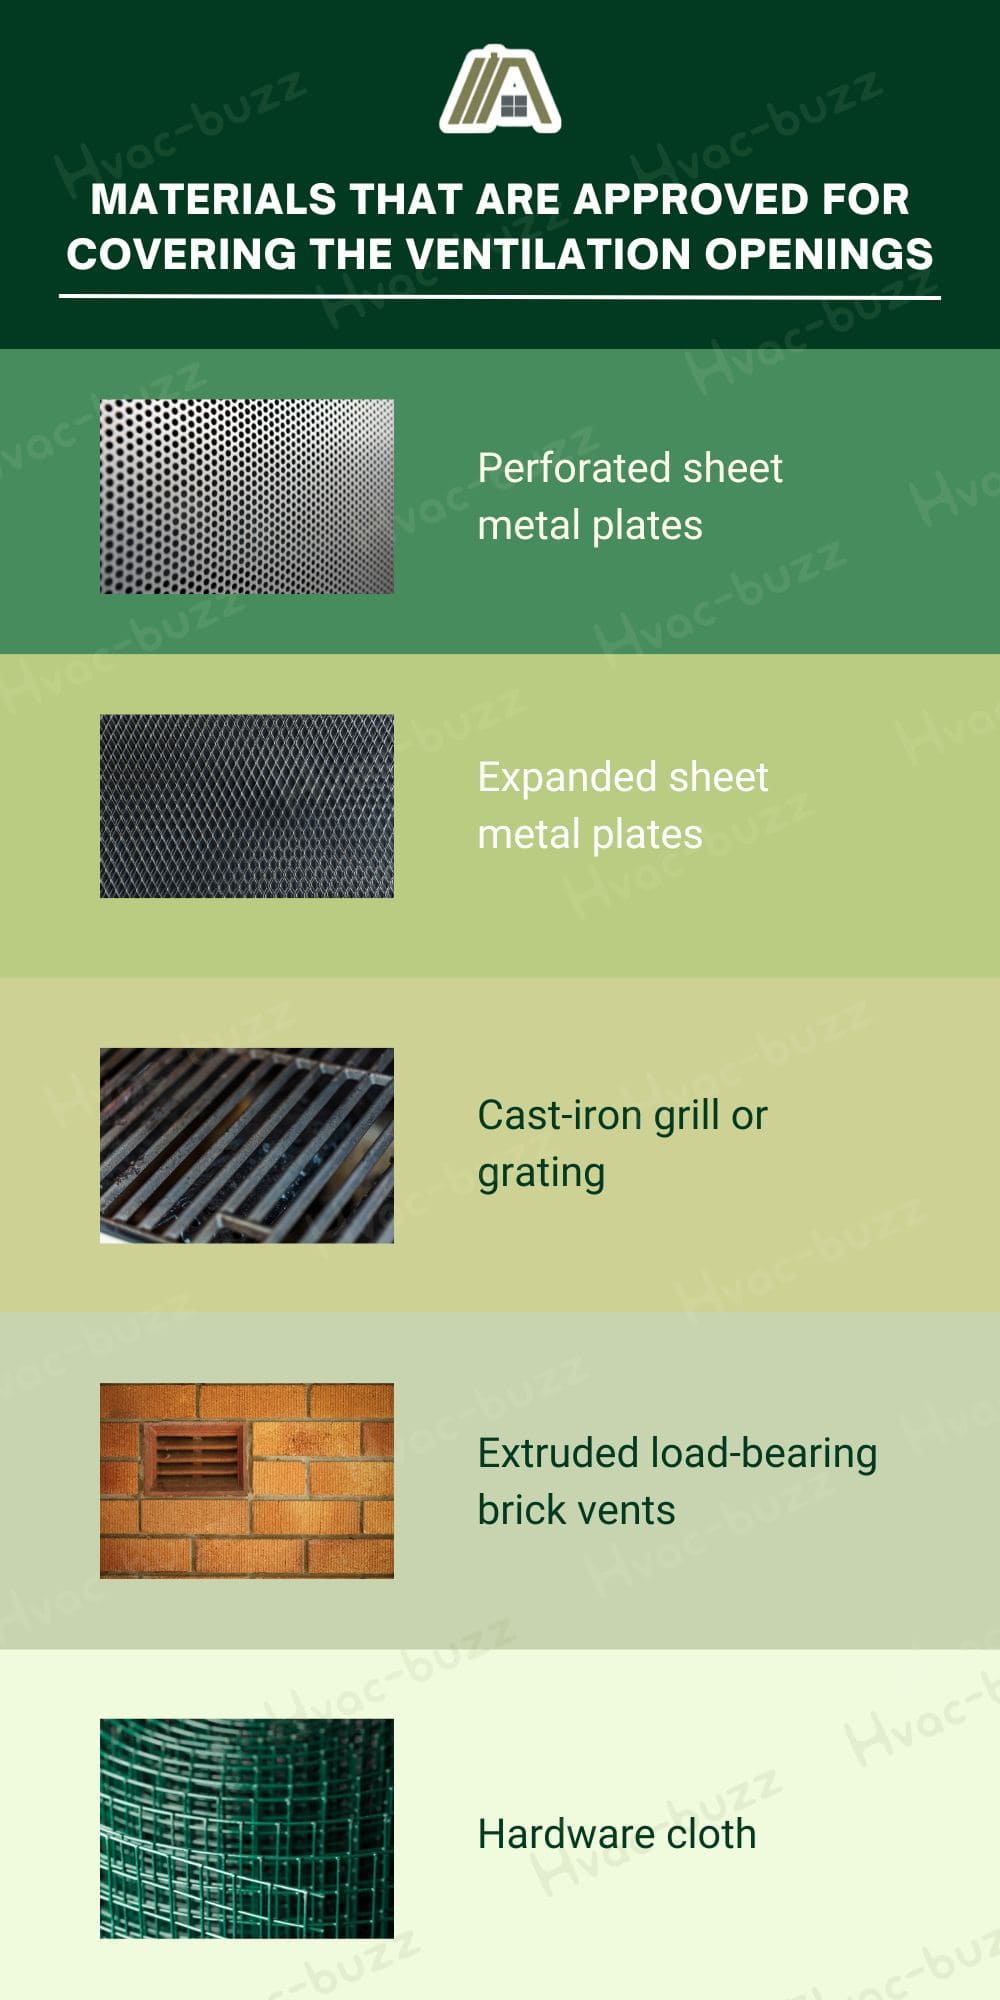 Materials that are approved for covering the ventilation openings